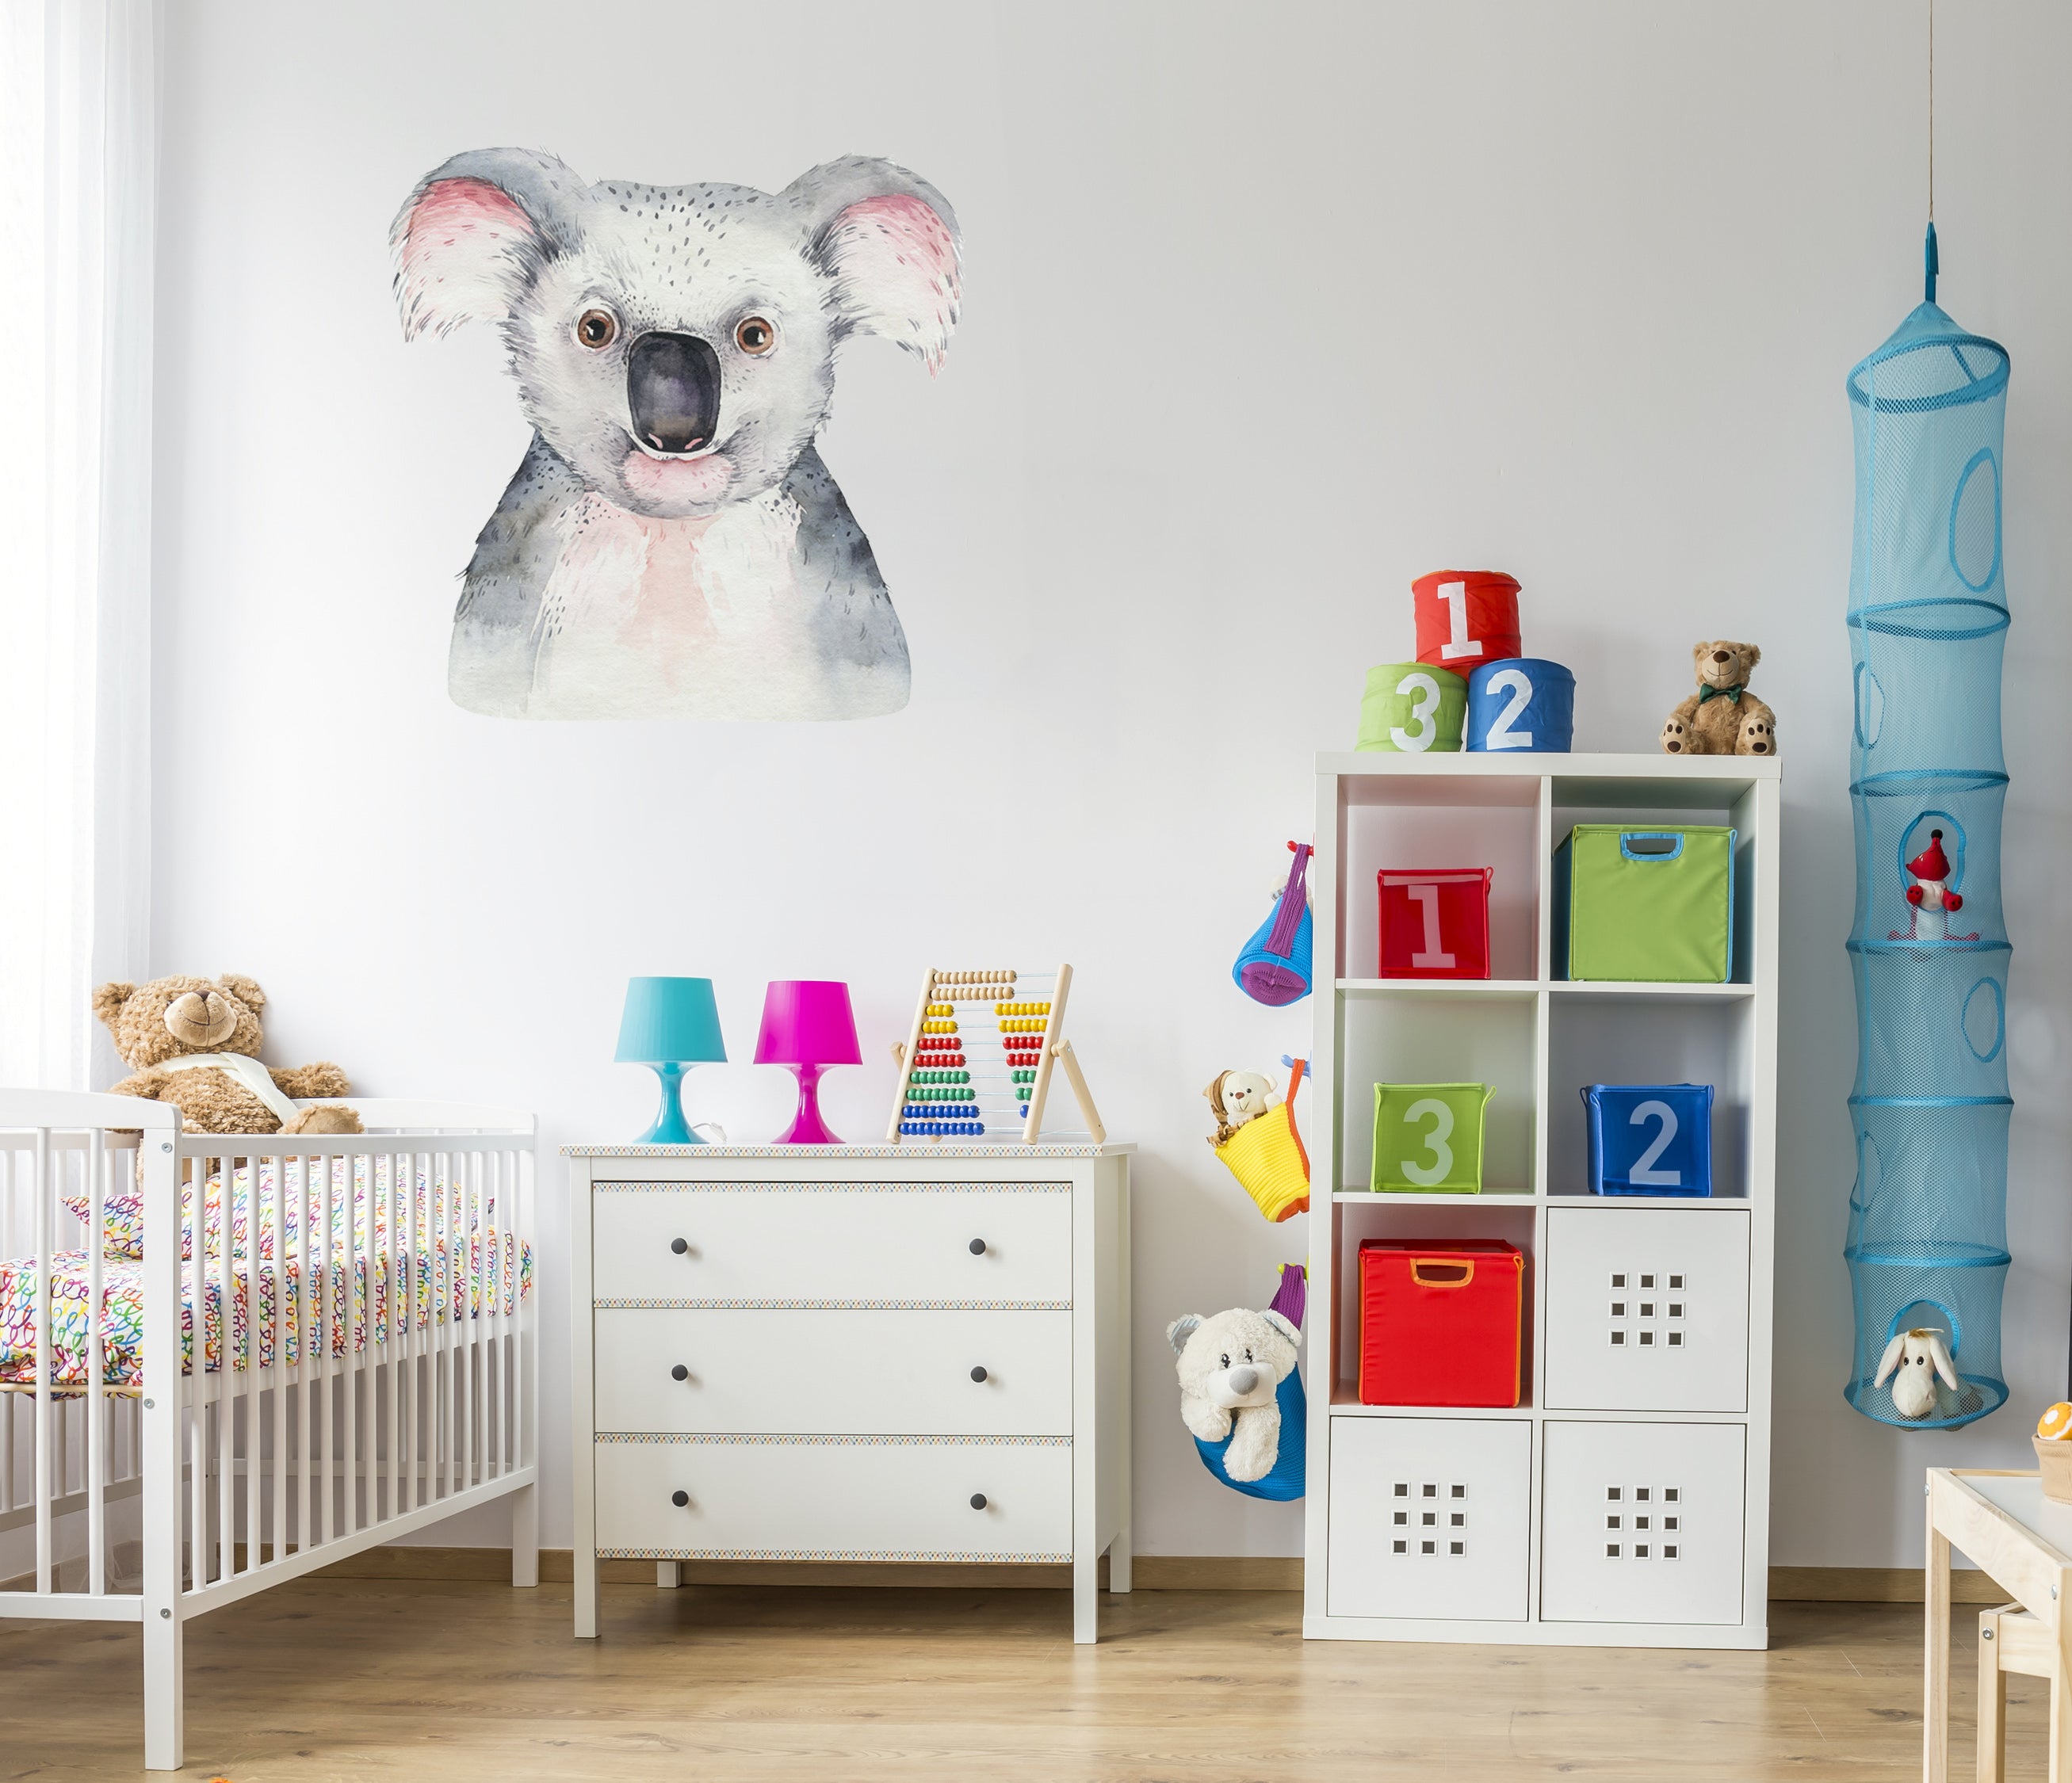 Water Color Panda Bear, Wall Decal Sticker, Removable with NO wall Damage!